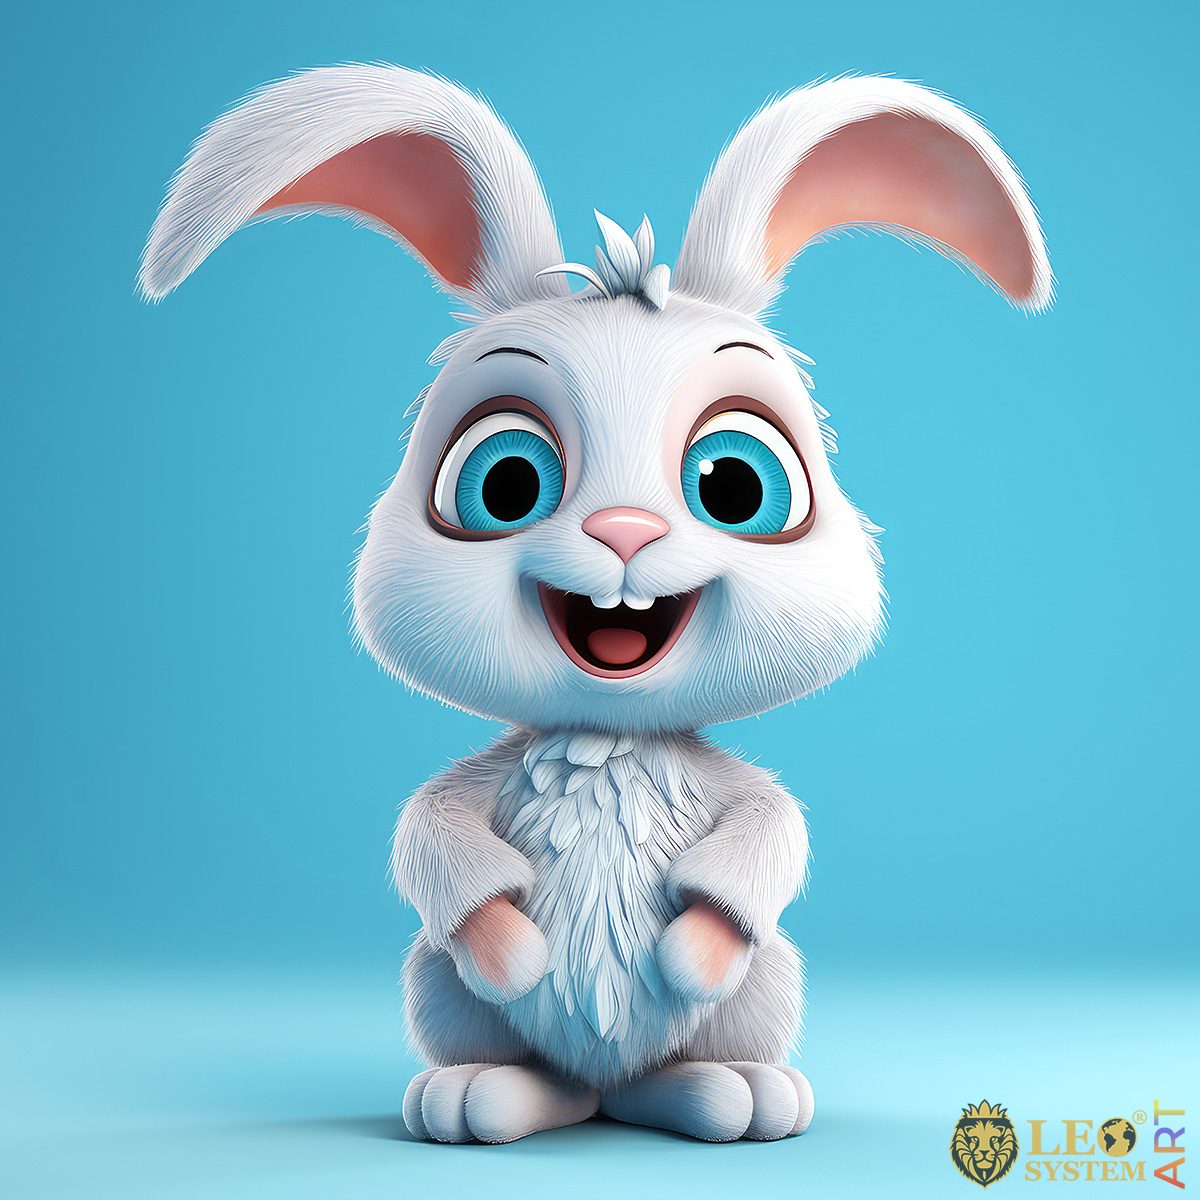 Cute 3D Rabbit with big ears